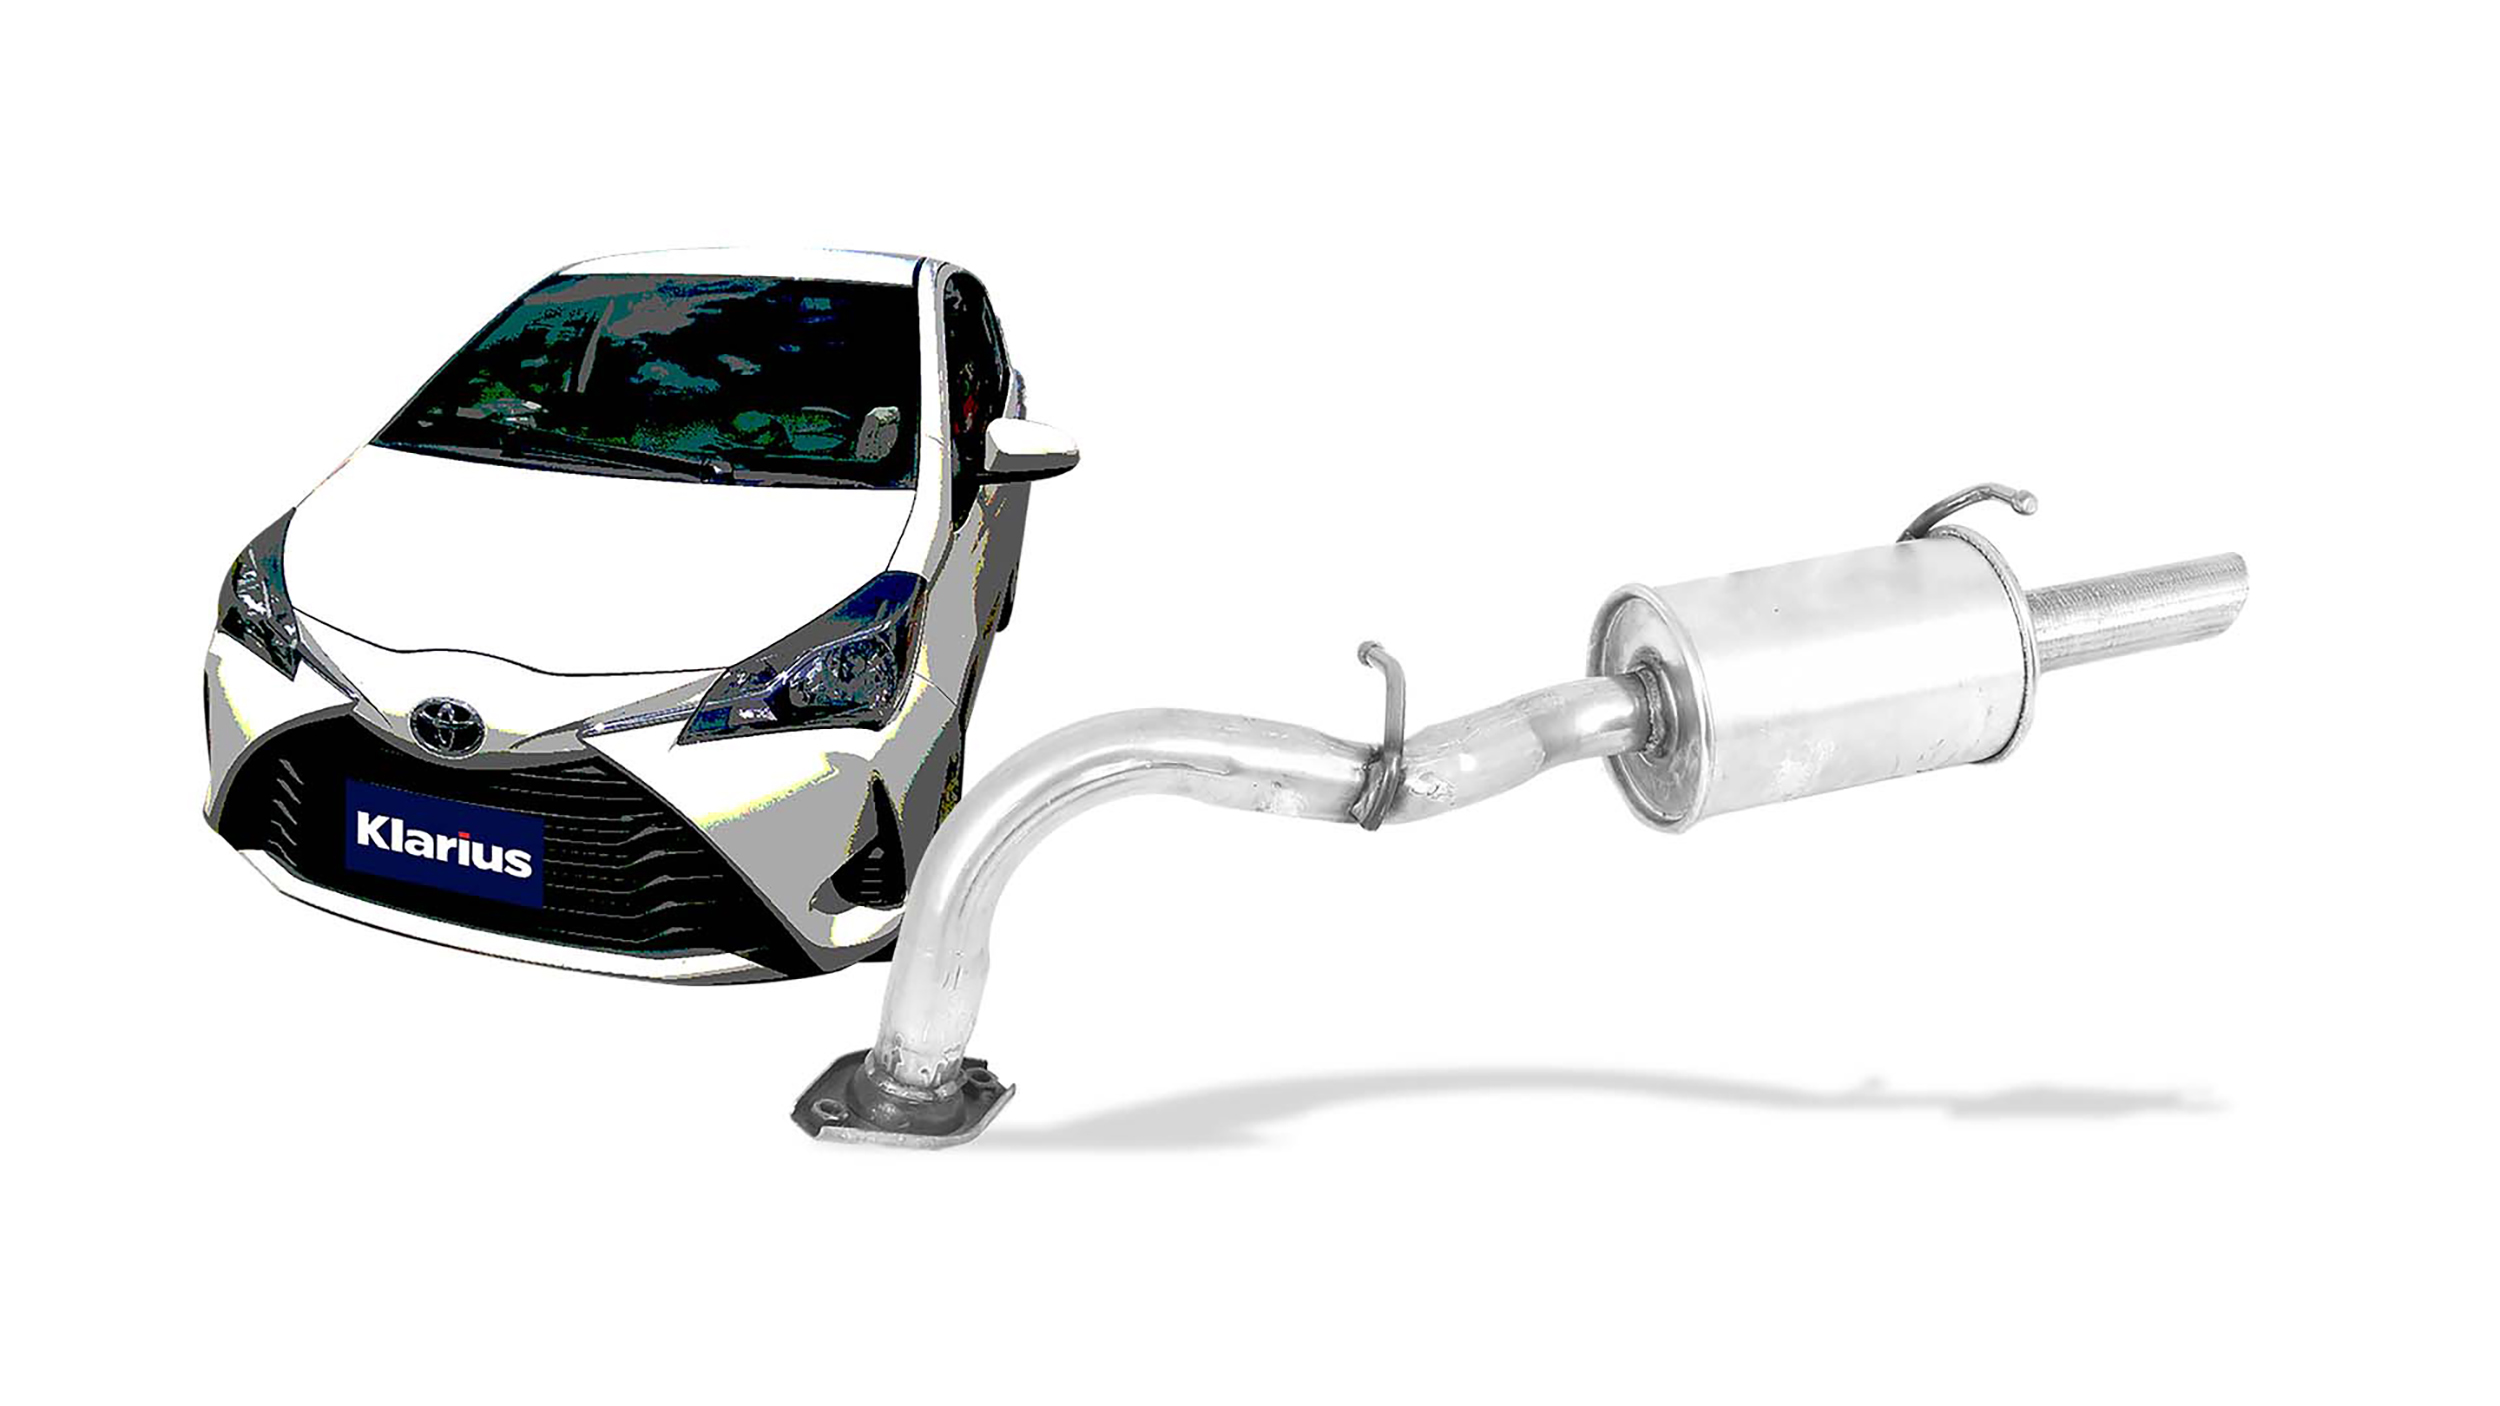 Klarius releases new parts including support for the Toyota Yaris